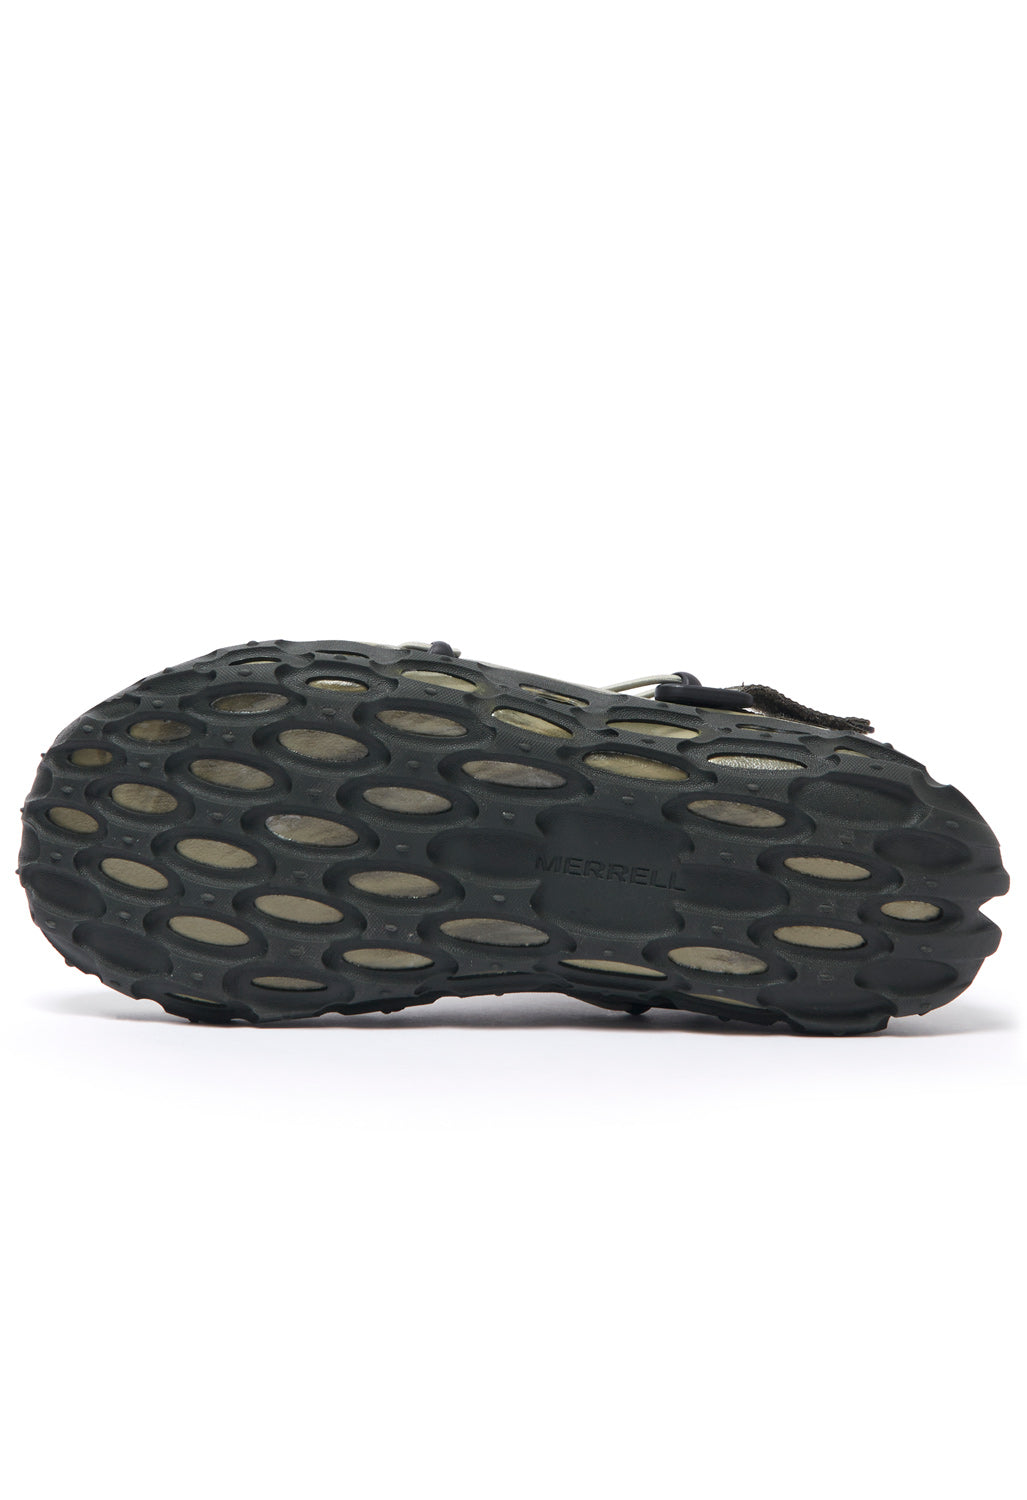 Merrell Hydro Moc AT Ripstop 1TRL Men's Shoes - Olive